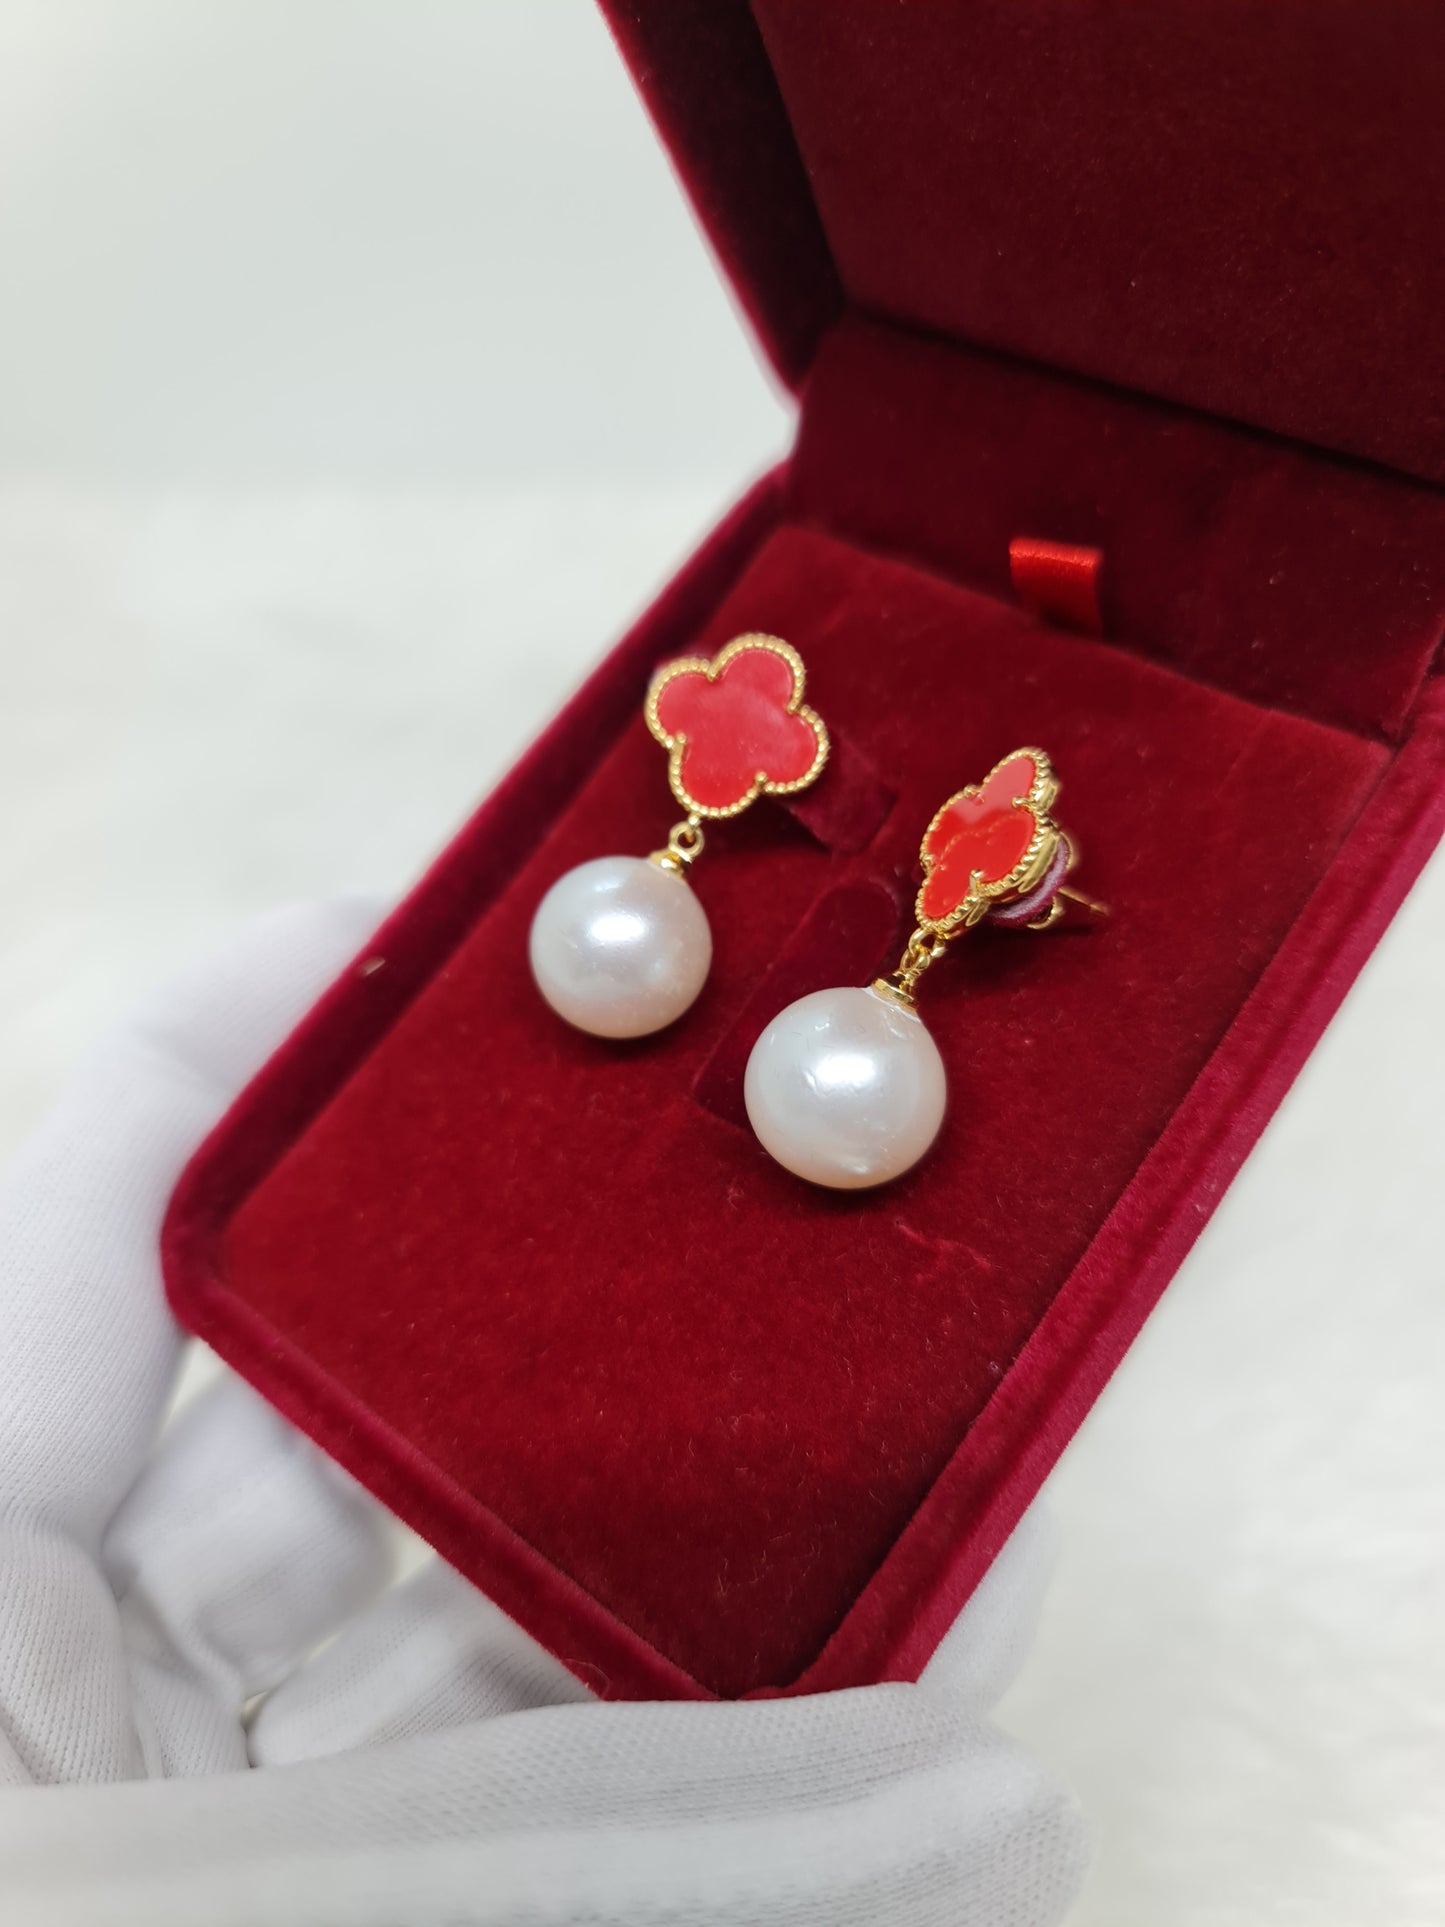 14.5mm - 14.7mm White South Sea Pearls Earrings Gold Plated